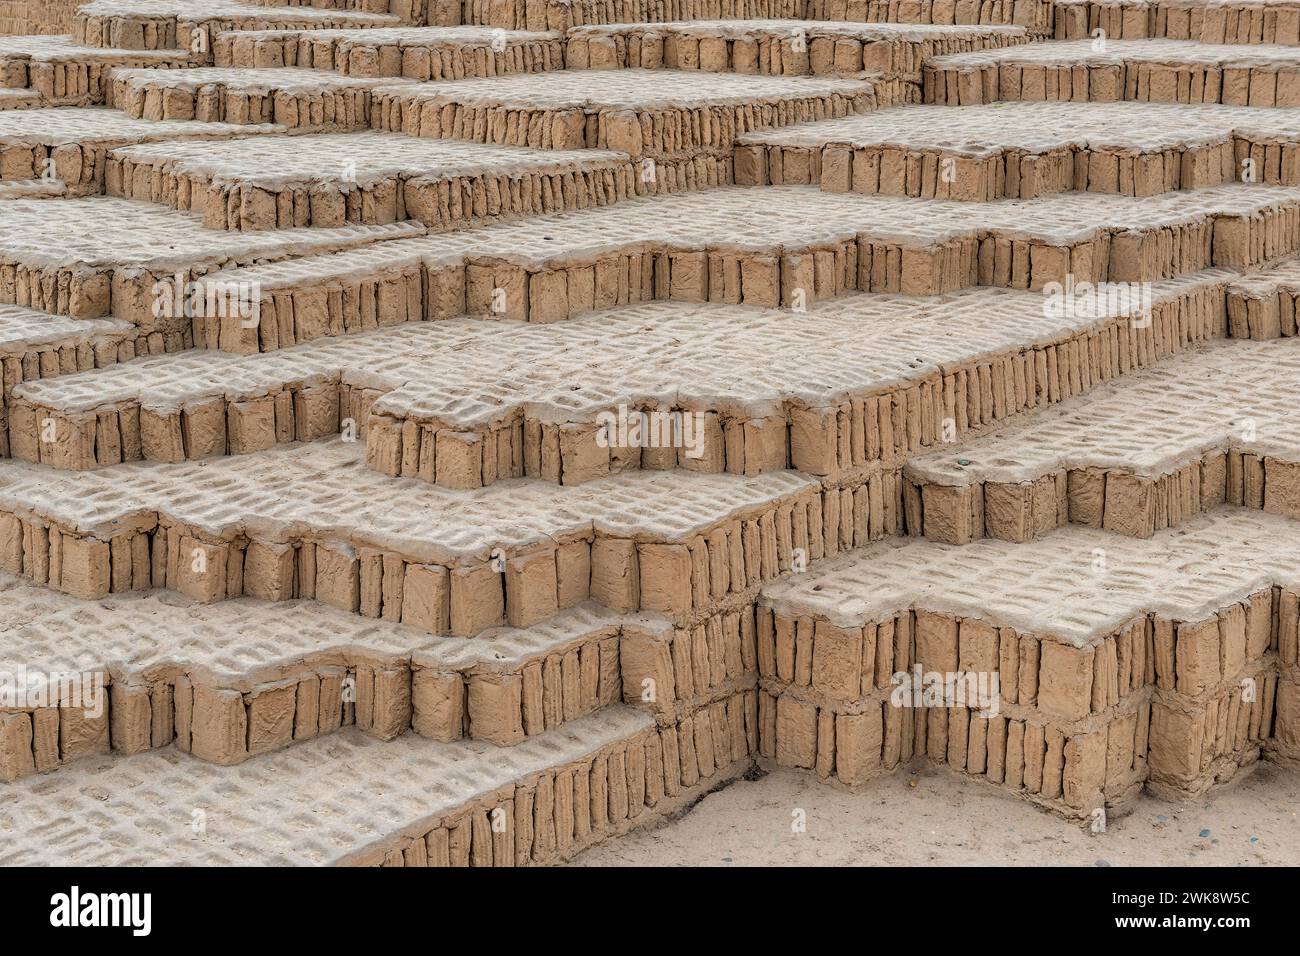 Architecture details of the Huaca Pucllana adobe and clay step pyramid of the Lima culture, Miraflores district, Lima, Peru. Stock Photo